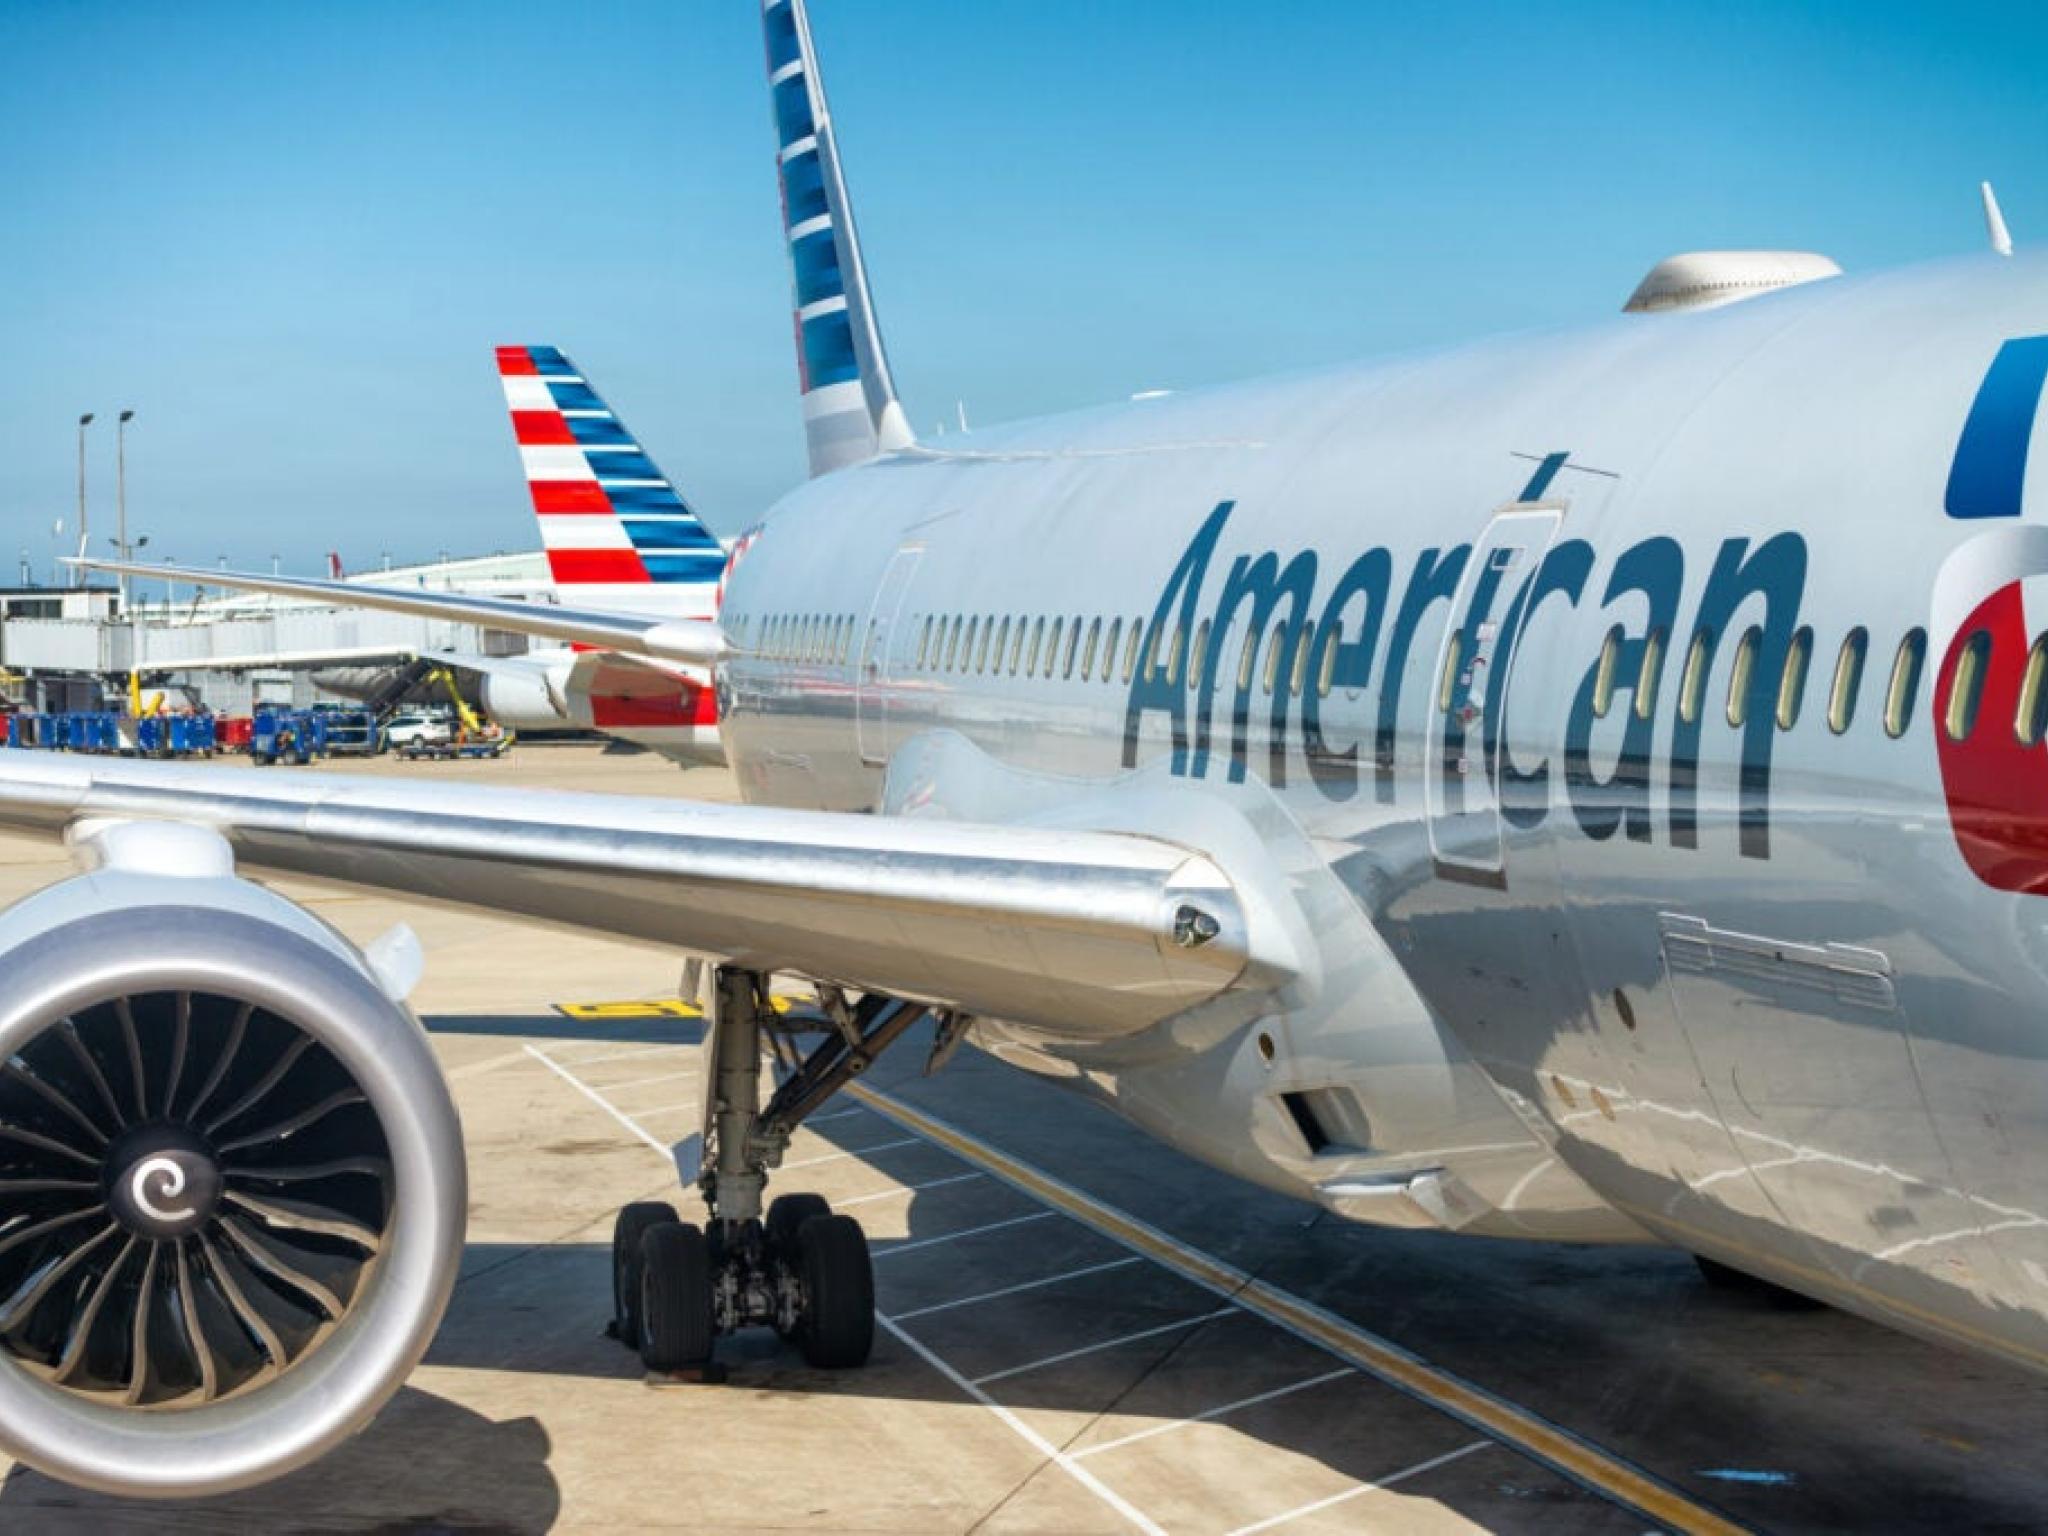  this-american-airlines-analyst-is-no-longer-bullish-here-are-top-5-downgrades-for-wednesday 